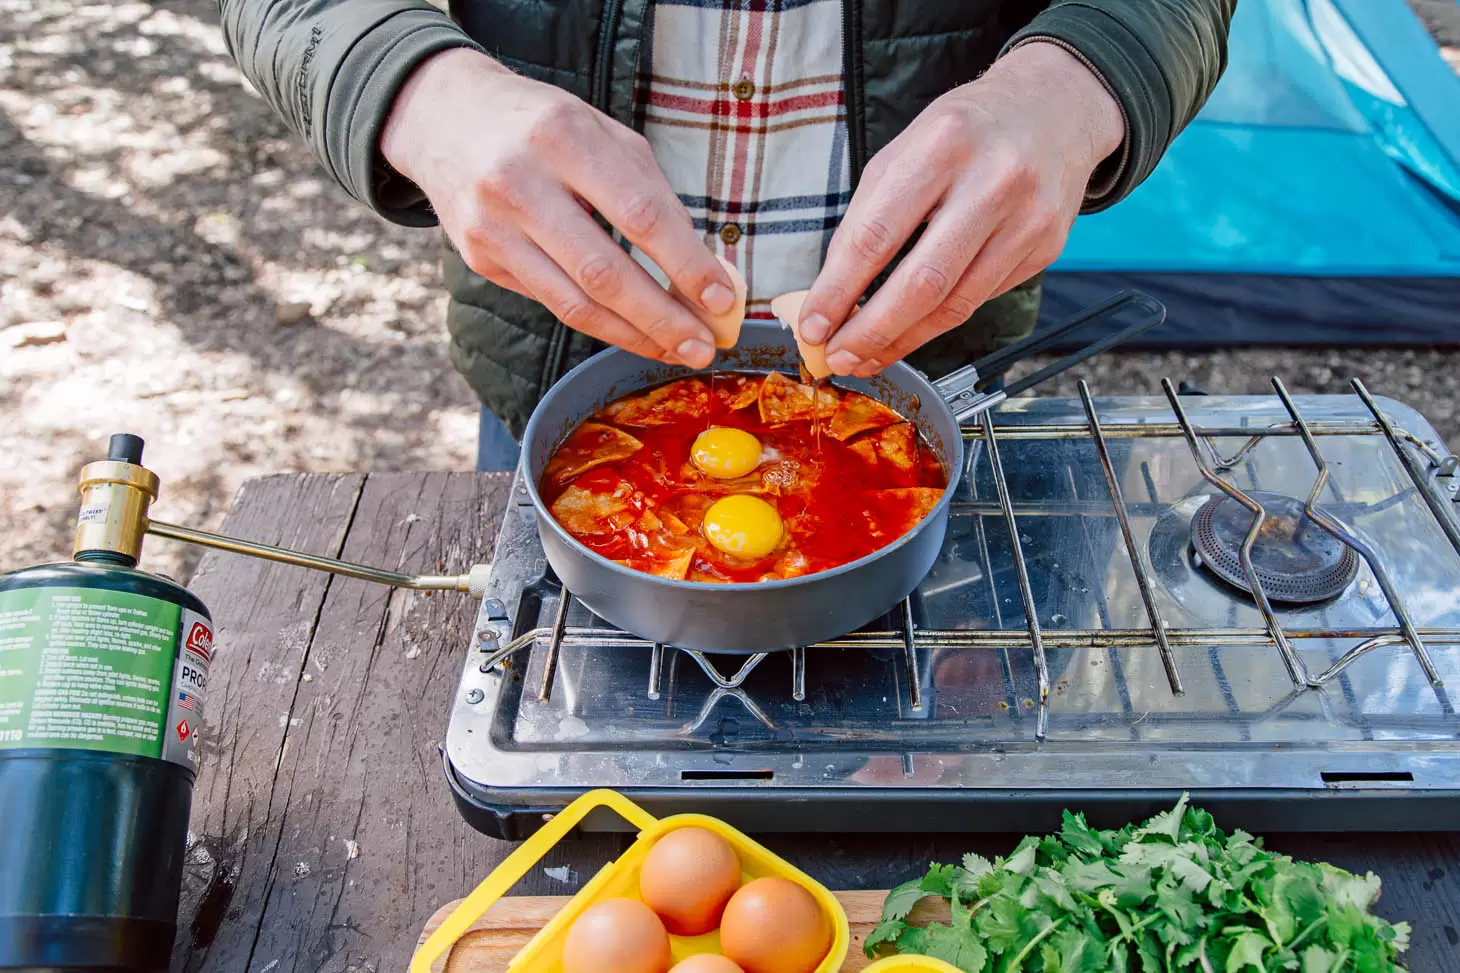 Chilaquiles is an easy camping breakfast idea - crispy tortillas simmered in a spicy tomato sauce and topped with eggs. It takes less than 30 minutes to make, and it's vegetarian, too!